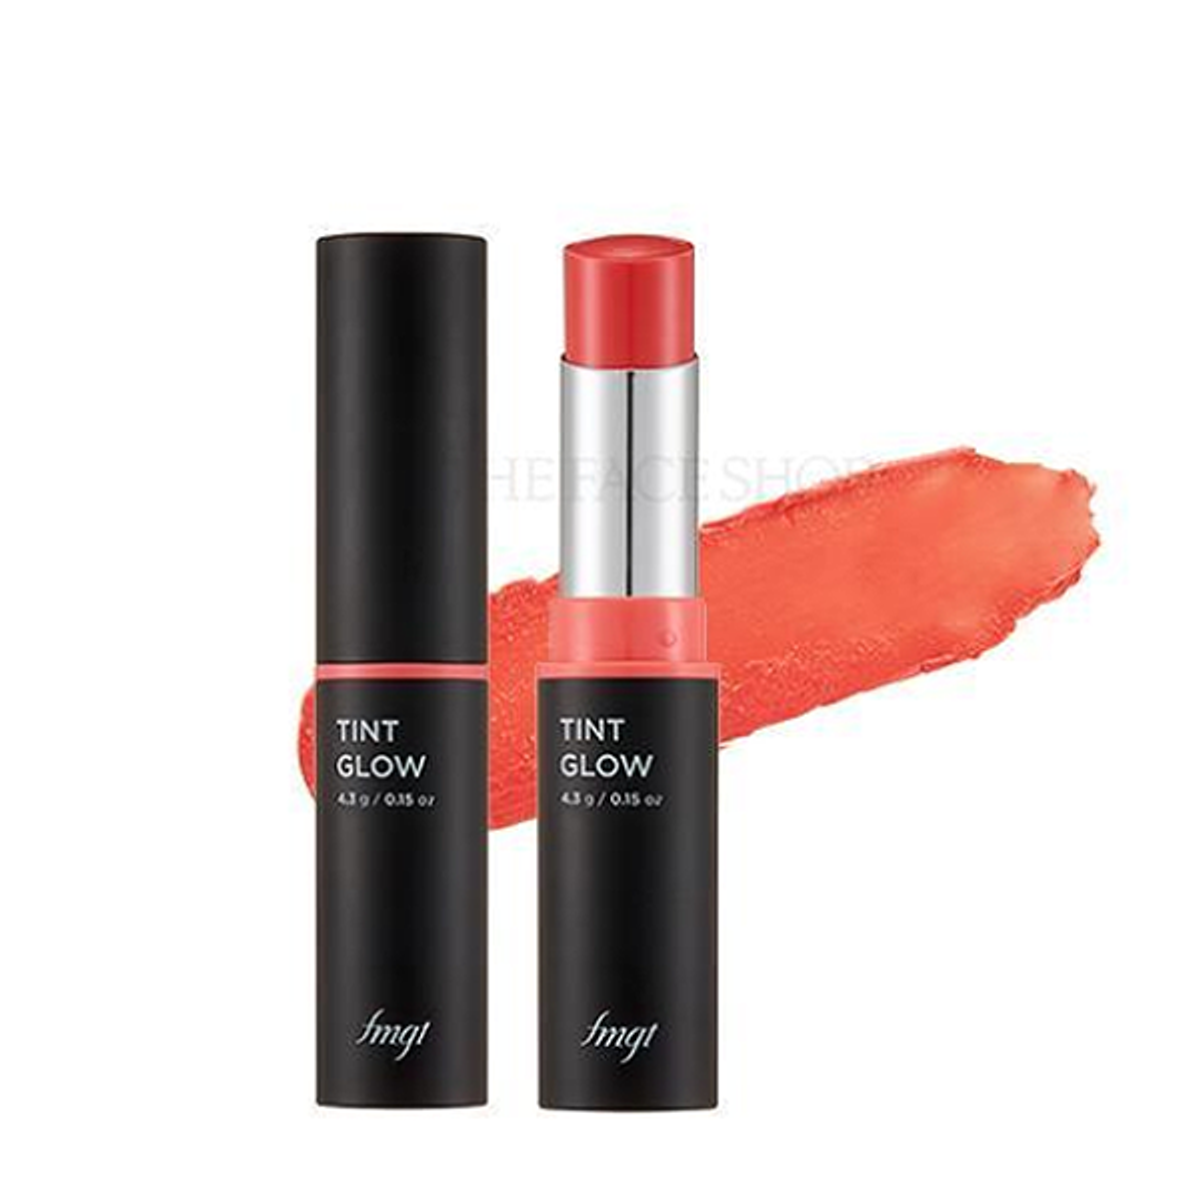 gift-fmgt-son-moi-duong-am-tu-nhien-thefaceshop-tint-glow-03-coral-mind-1